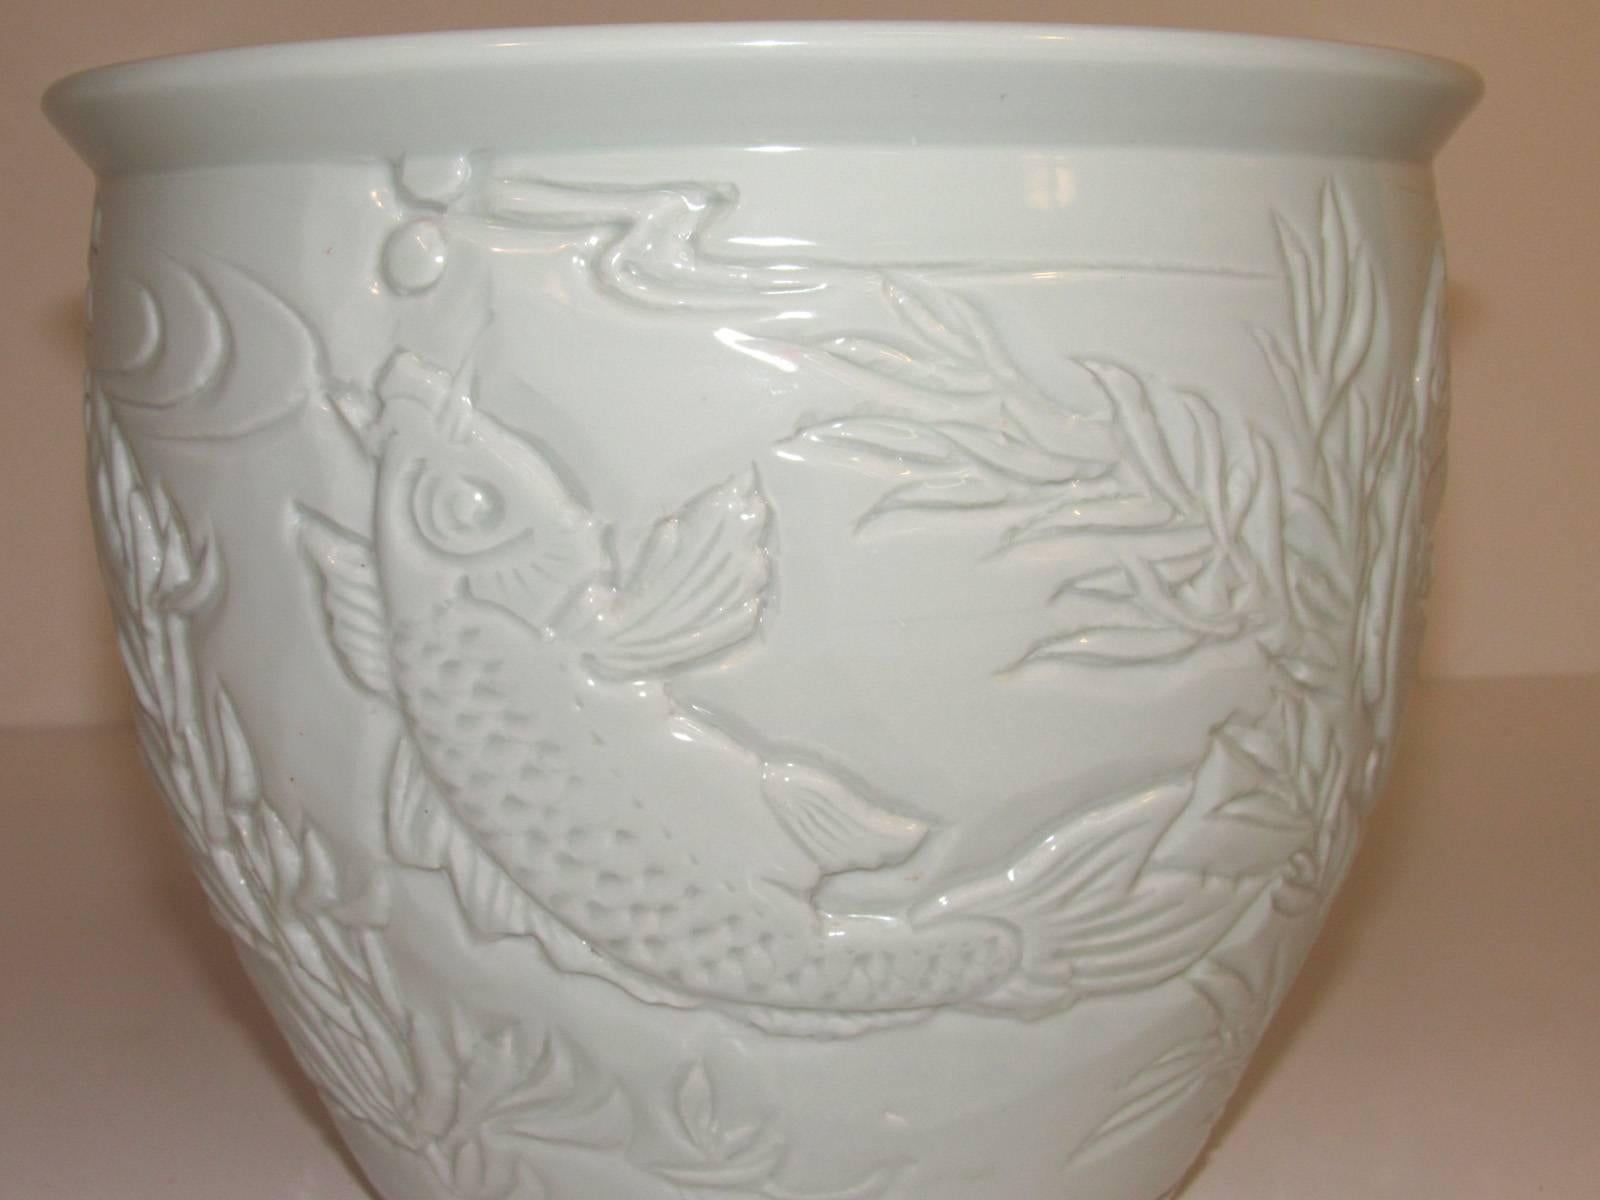 Early 20th century Chinese celadon planter with fish relief.